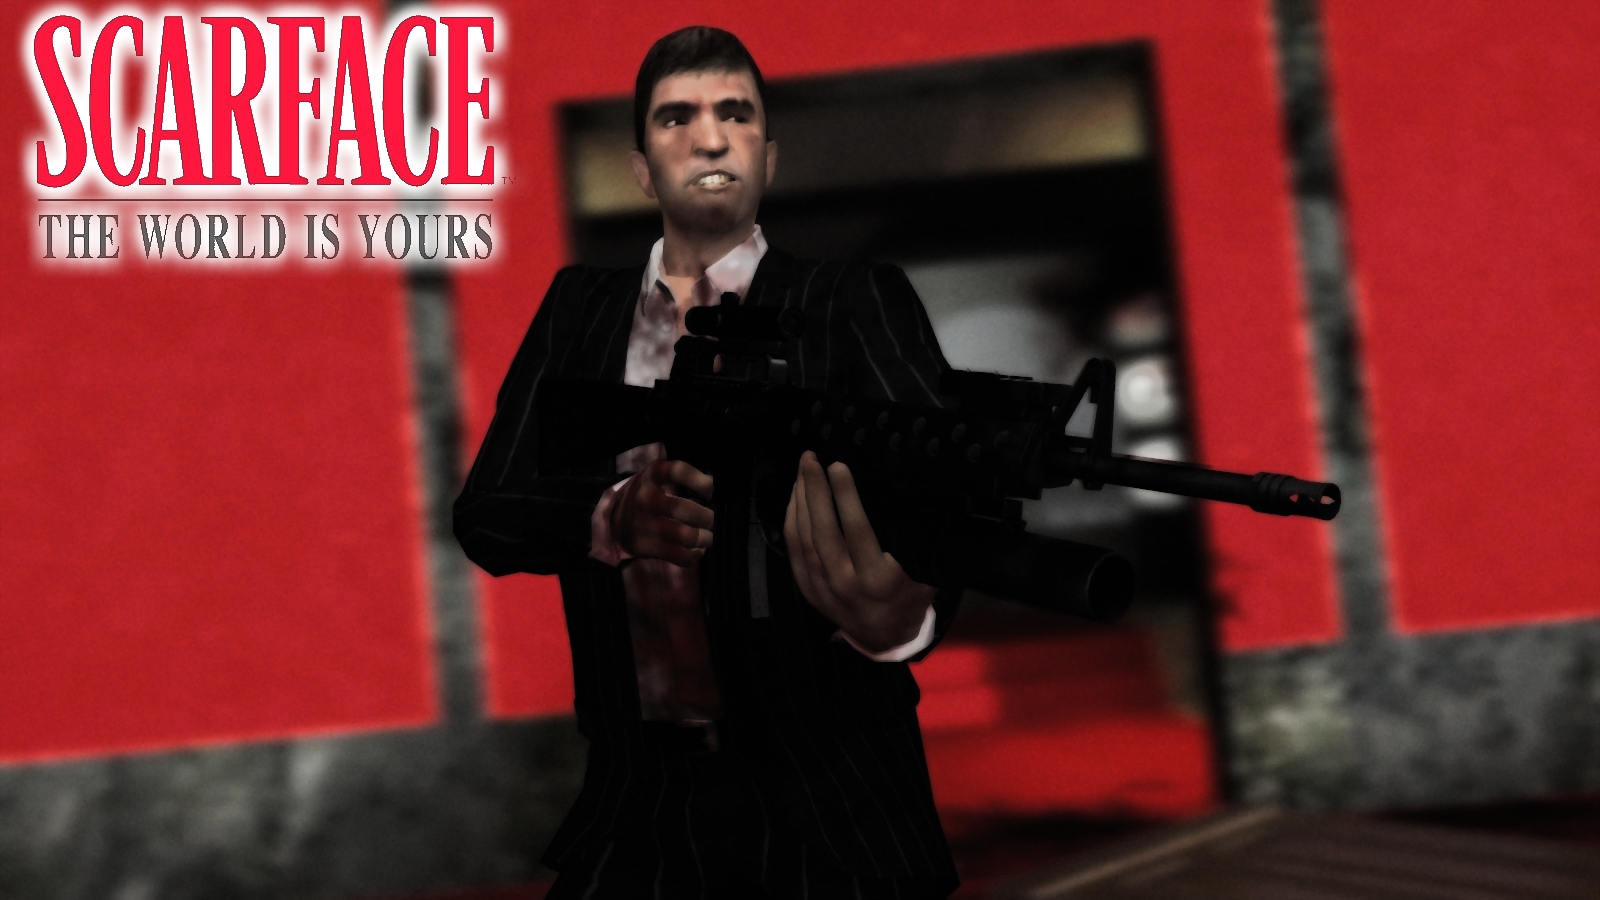 Scarface The World Is Yours Tony Montana - HD Wallpaper 